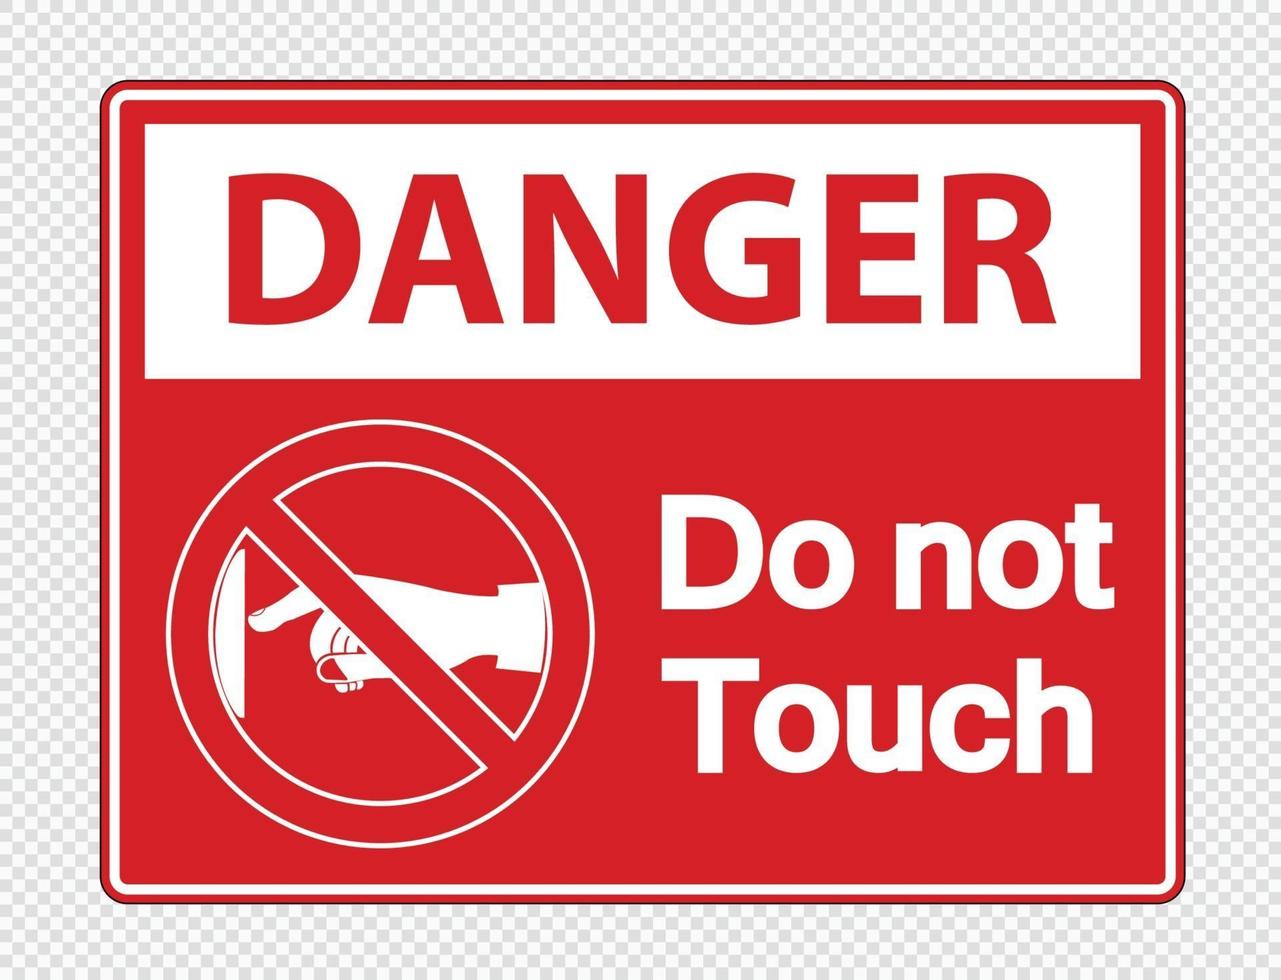 Danger do not touch sign label on transparent background vector